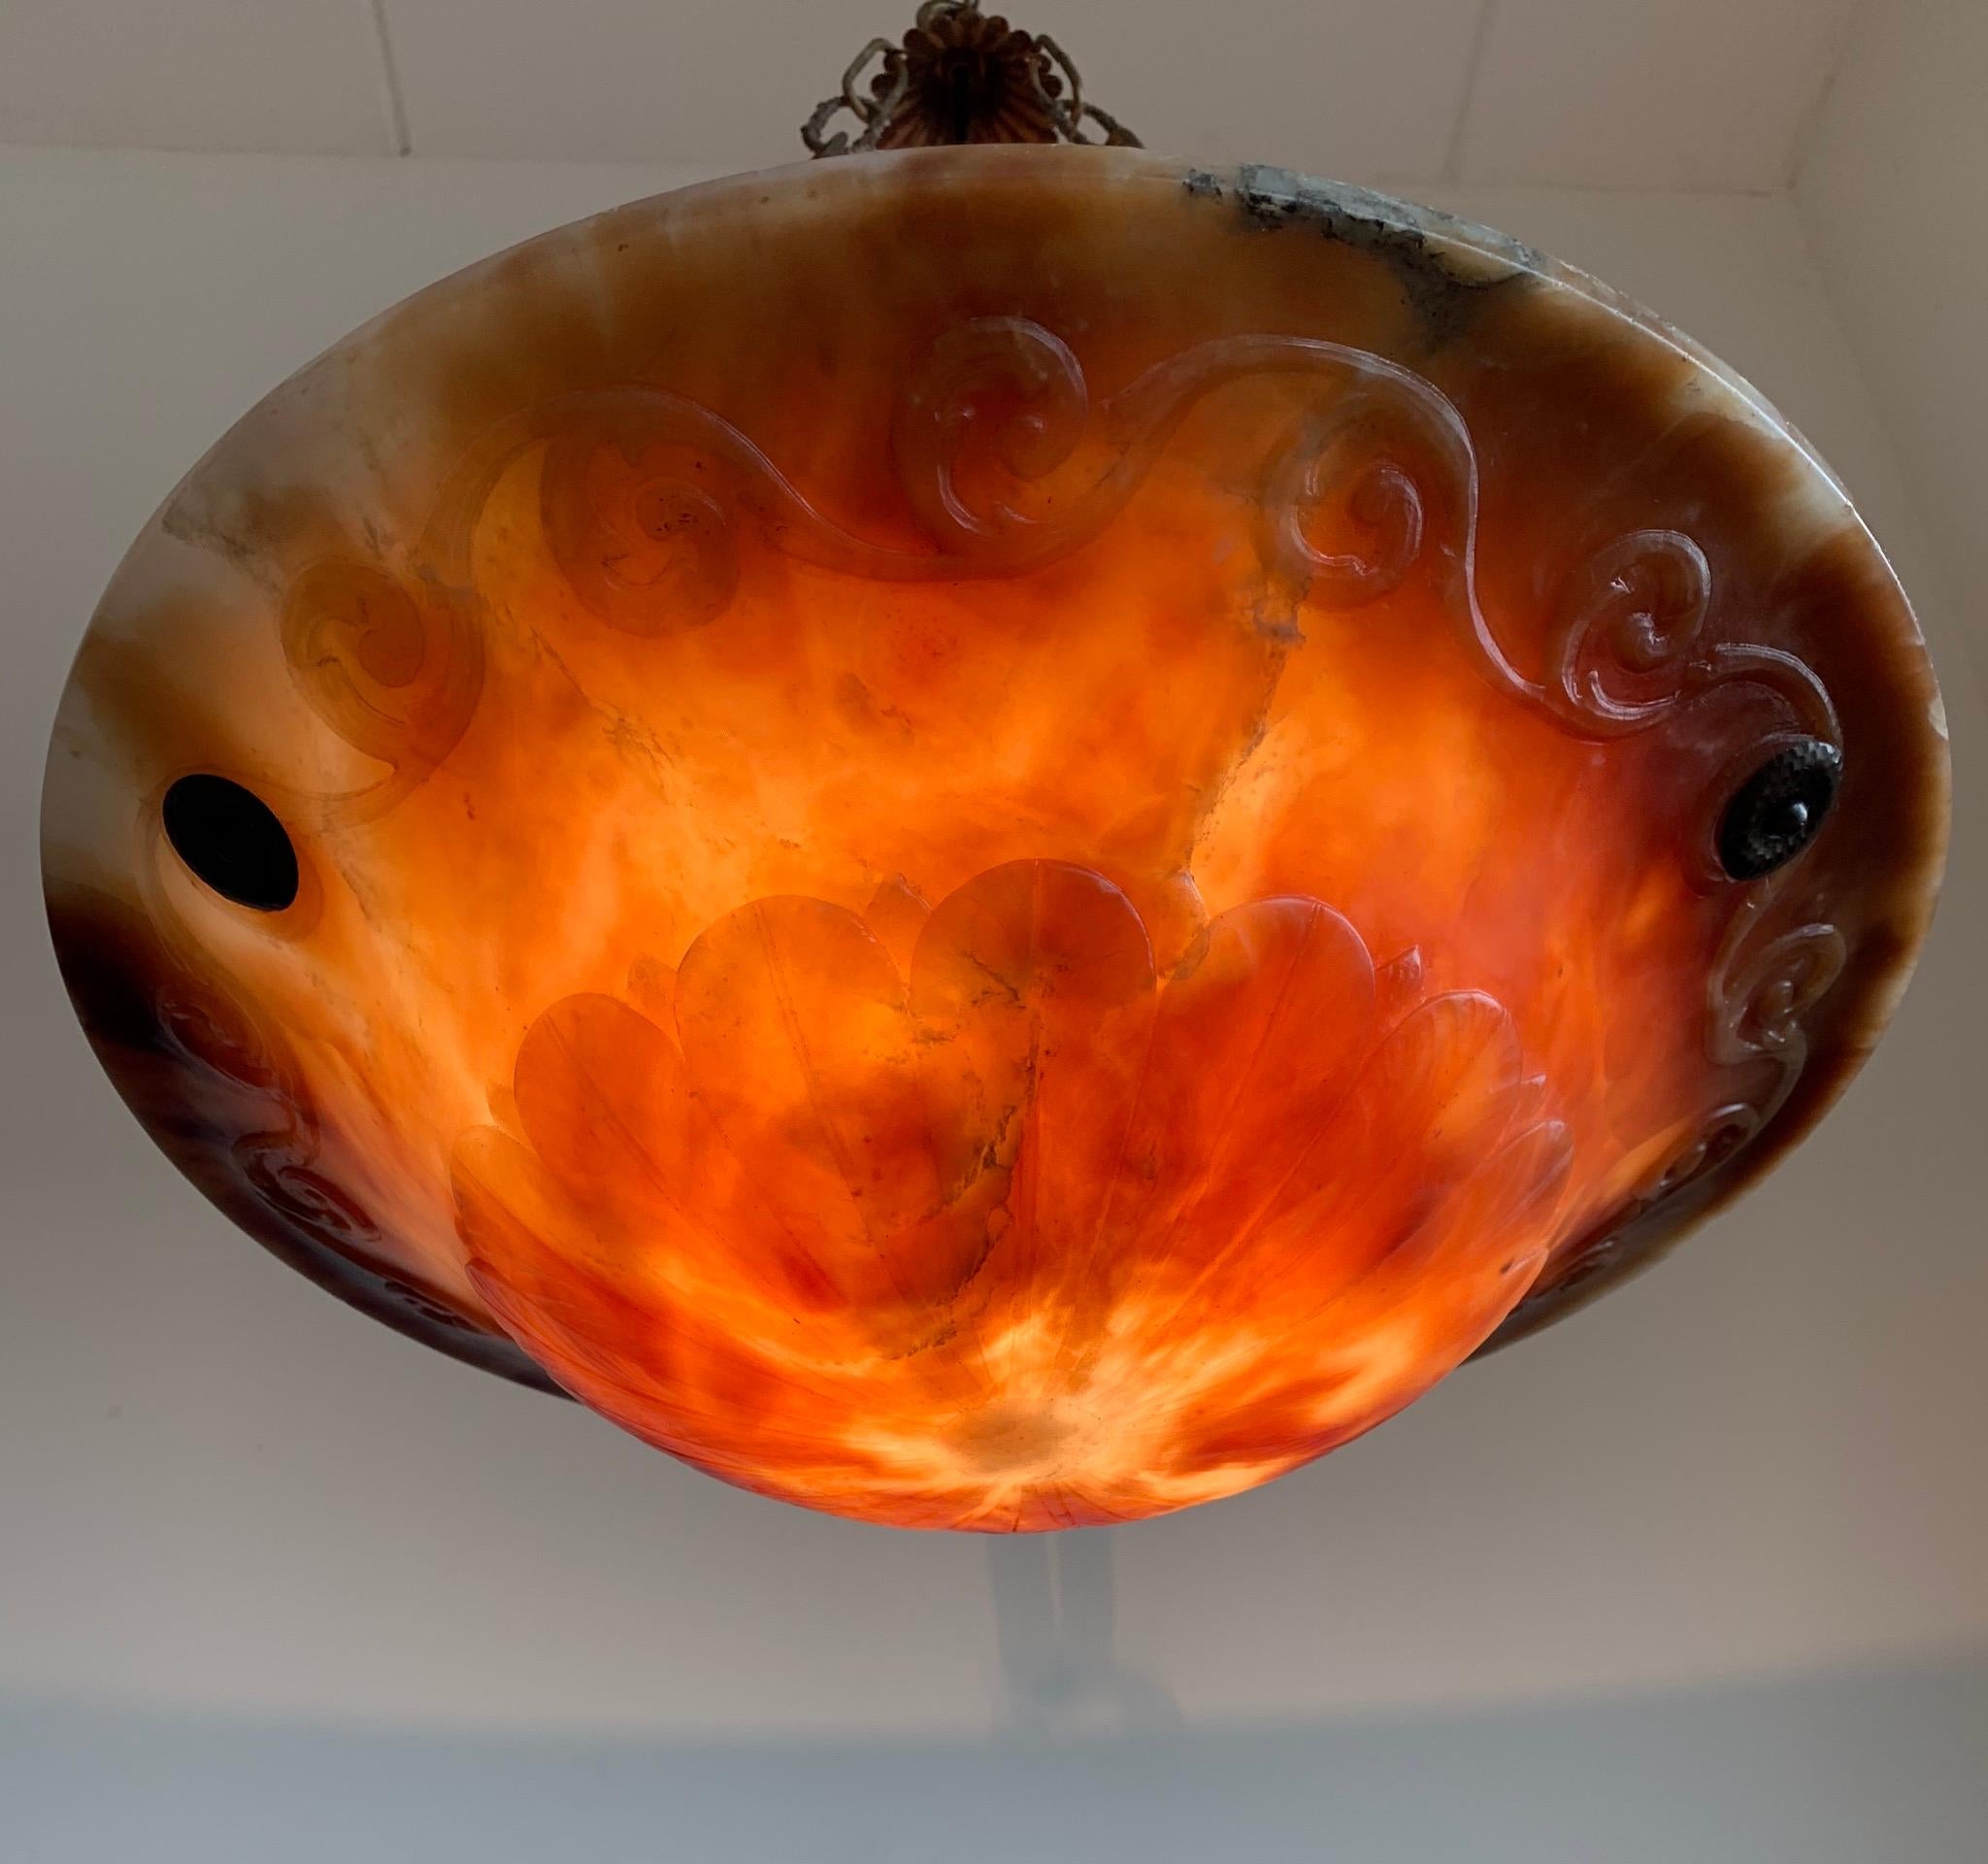 One of a kind in shape and colors, alabaster light fixture.

If you are looking for a great quality and striking colors pendant then this turn of the century example could be the one for you. The practical size alabaster shade comes with hand-carved